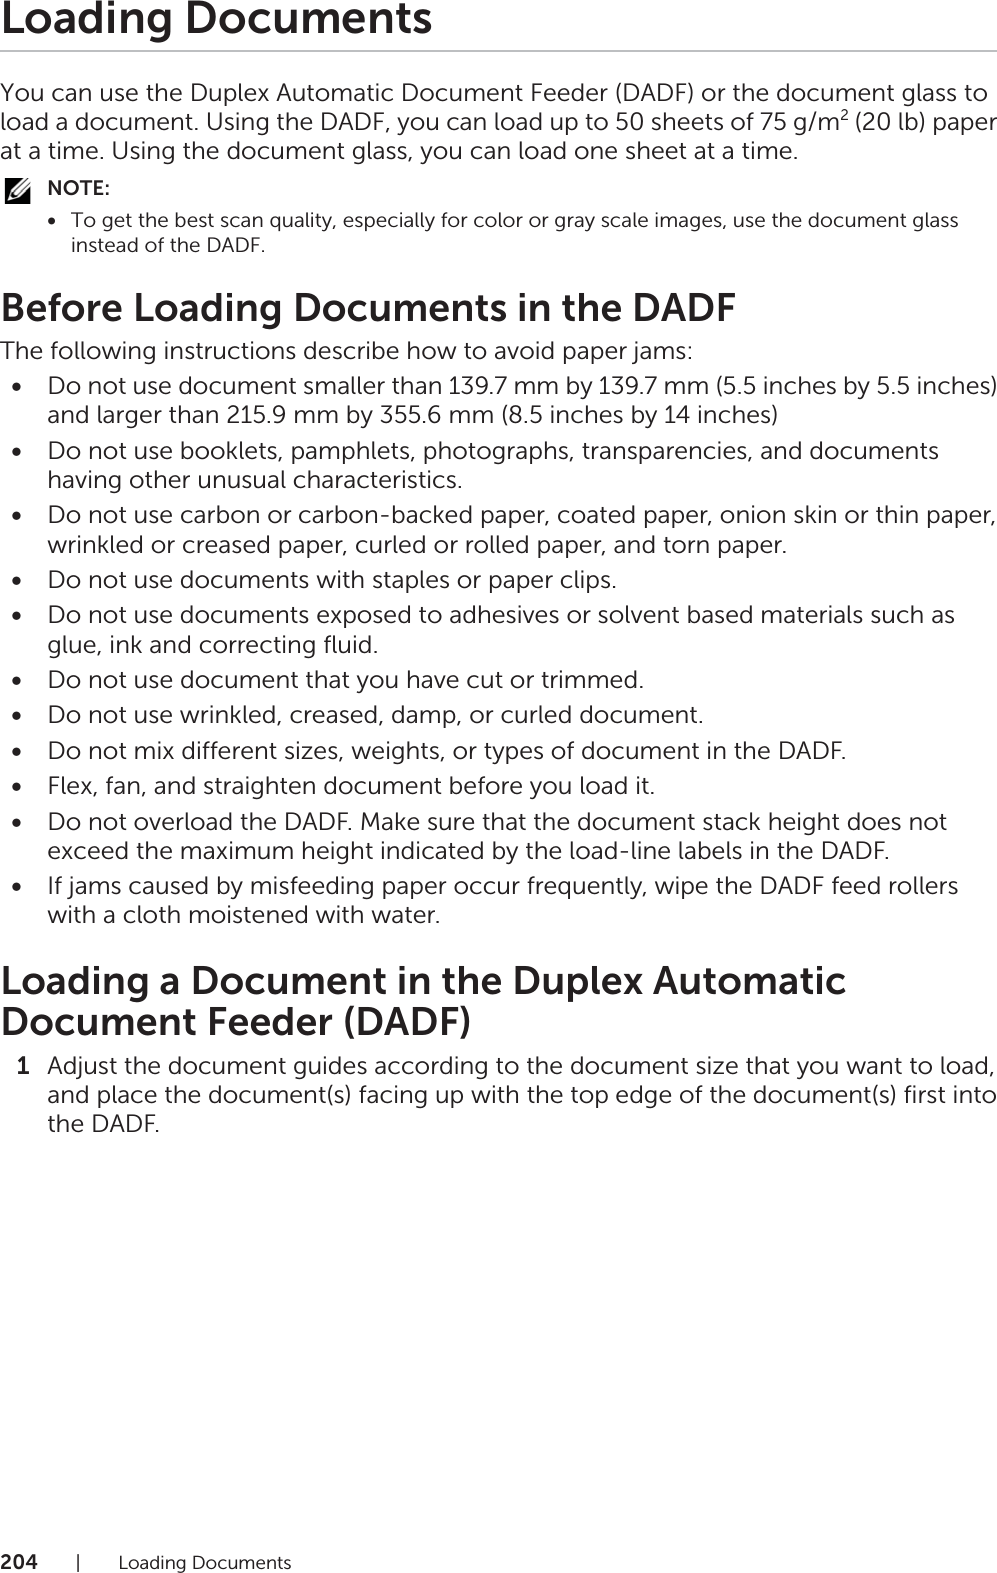 204| Loading DocumentsLoading DocumentsYou can use the Duplex Automatic Document Feeder (DADF) or the document glass to load a document. Using the DADF, you can load up to 50 sheets of 75 g/m2 (20 lb) paper at a time. Using the document glass, you can load one sheet at a time.NOTE:•To get the best scan quality, especially for color or gray scale images, use the document glass instead of the DADF.Before Loading Documents in the DADFThe following instructions describe how to avoid paper jams:•Do not use document smaller than 139.7 mm by 139.7 mm (5.5 inches by 5.5 inches) and larger than 215.9 mm by 355.6 mm (8.5 inches by 14 inches)•Do not use booklets, pamphlets, photographs, transparencies, and documents having other unusual characteristics.•Do not use carbon or carbon-backed paper, coated paper, onion skin or thin paper, wrinkled or creased paper, curled or rolled paper, and torn paper.•Do not use documents with staples or paper clips.•Do not use documents exposed to adhesives or solvent based materials such as glue, ink and correcting fluid.•Do not use document that you have cut or trimmed.•Do not use wrinkled, creased, damp, or curled document.•Do not mix different sizes, weights, or types of document in the DADF.•Flex, fan, and straighten document before you load it.•Do not overload the DADF. Make sure that the document stack height does not exceed the maximum height indicated by the load-line labels in the DADF.•If jams caused by misfeeding paper occur frequently, wipe the DADF feed rollers with a cloth moistened with water.Loading a Document in the Duplex Automatic Document Feeder (DADF)1Adjust the document guides according to the document size that you want to load, and place the document(s) facing up with the top edge of the document(s) first into the DADF.